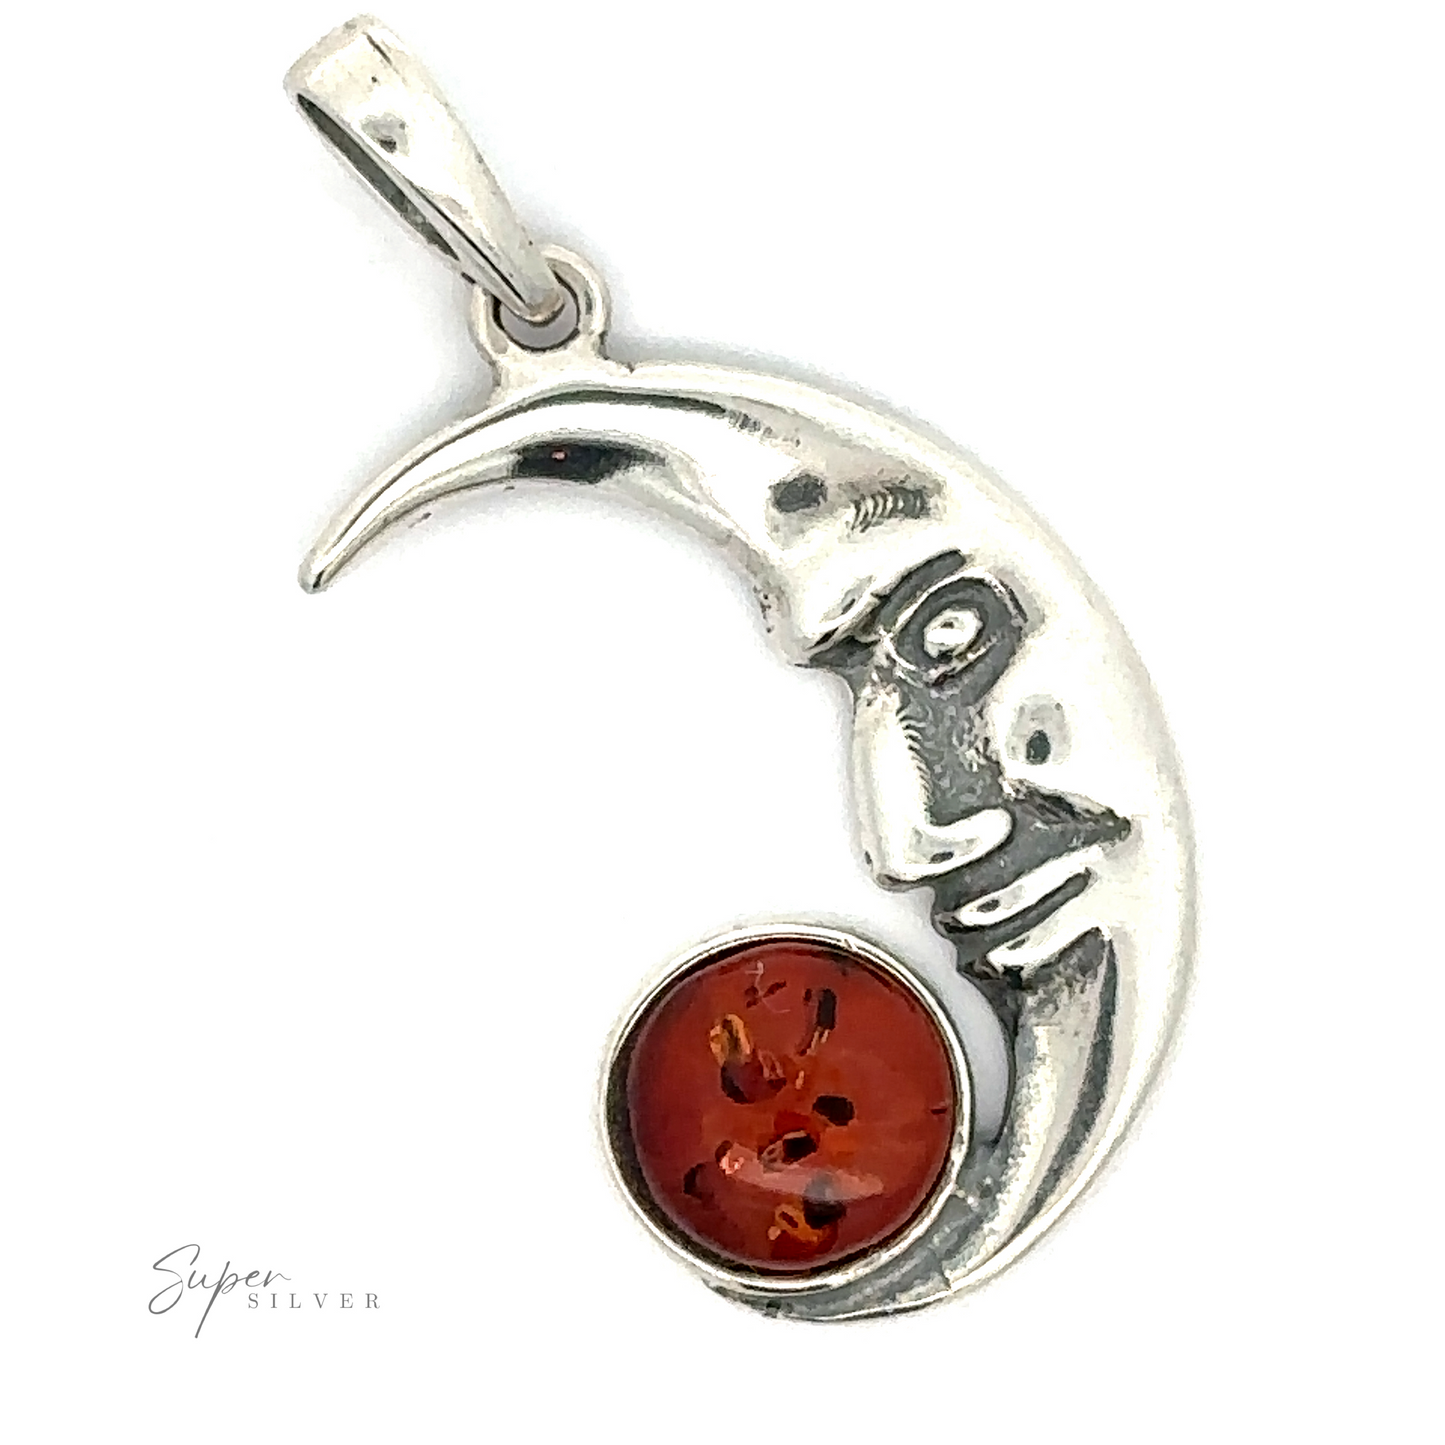 Baltic Amber Man in the Moon Pendant with an embedded Baltic amber gemstone at its base.